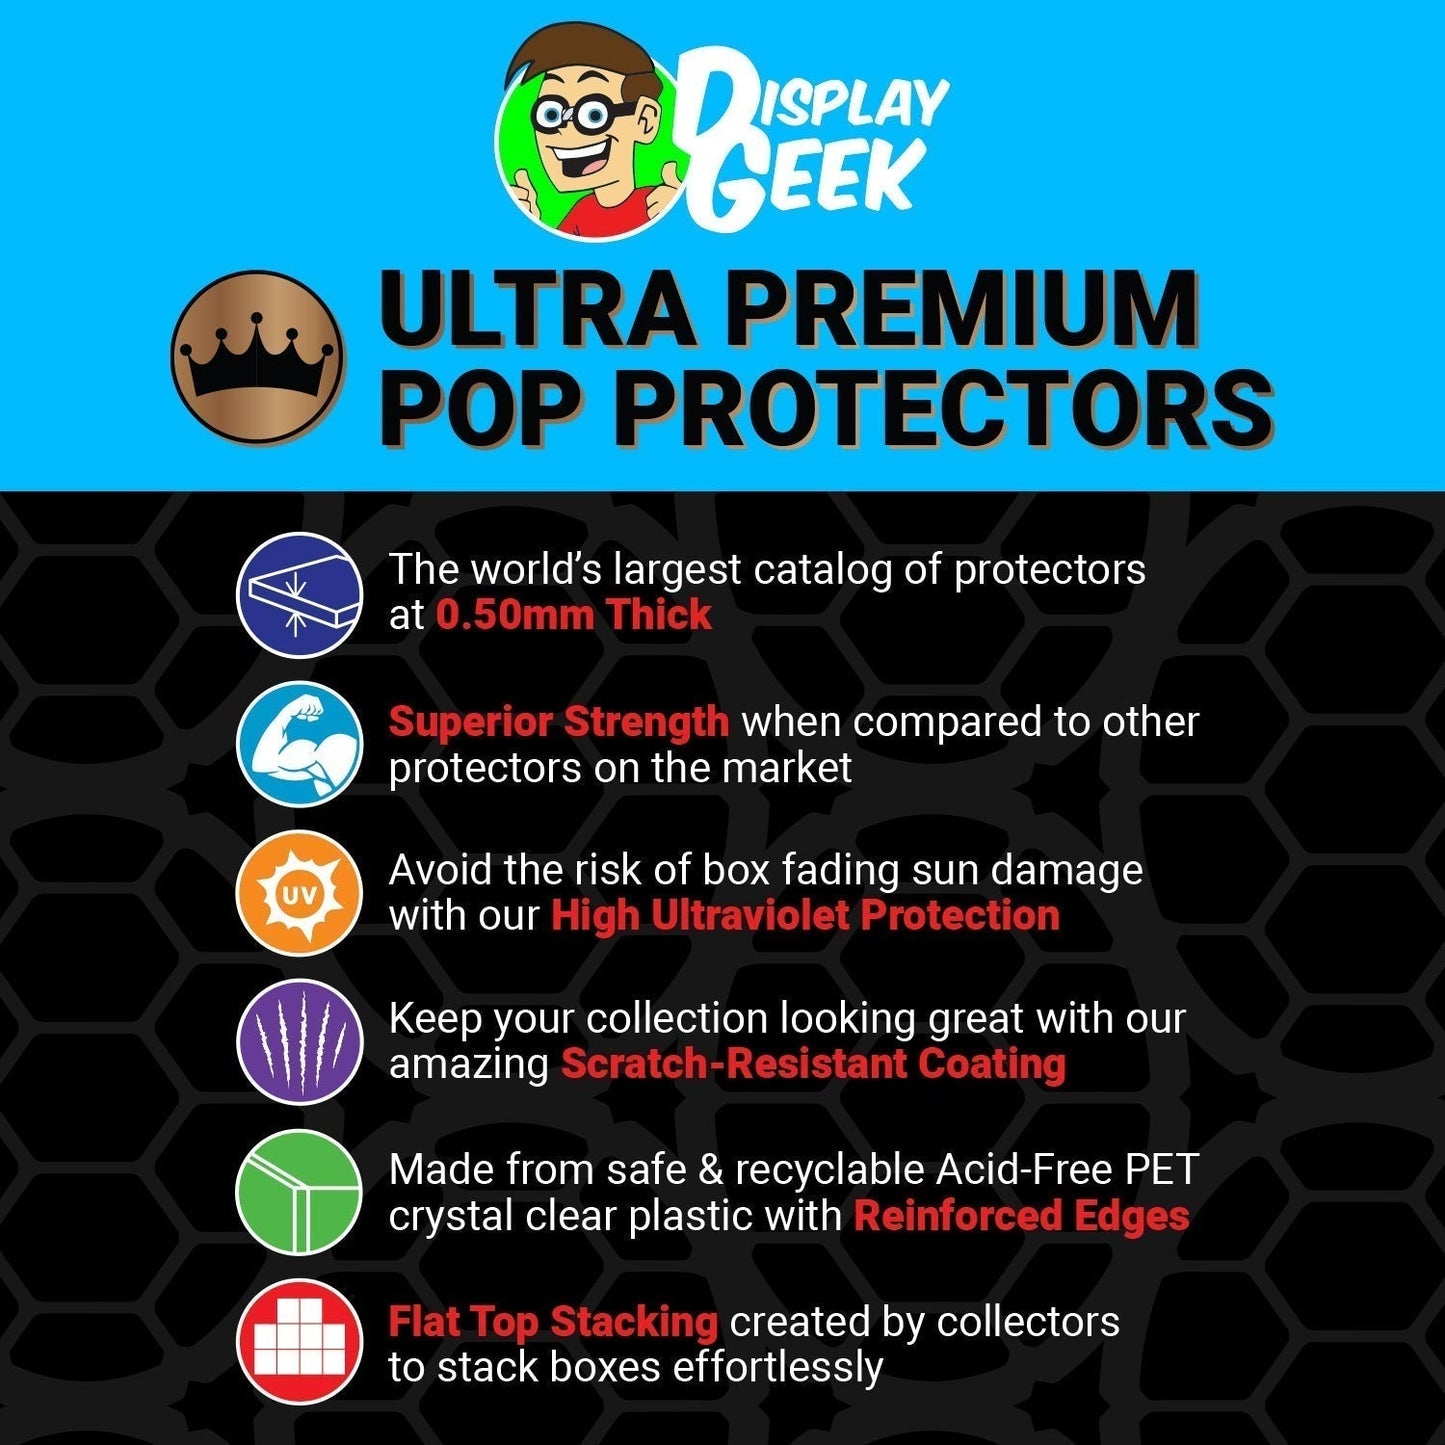 Pop Protector for Black Adam on Throne #1239 Funko Pop Deluxe - PPG Pop Protector Guide Search Created by Display Geek